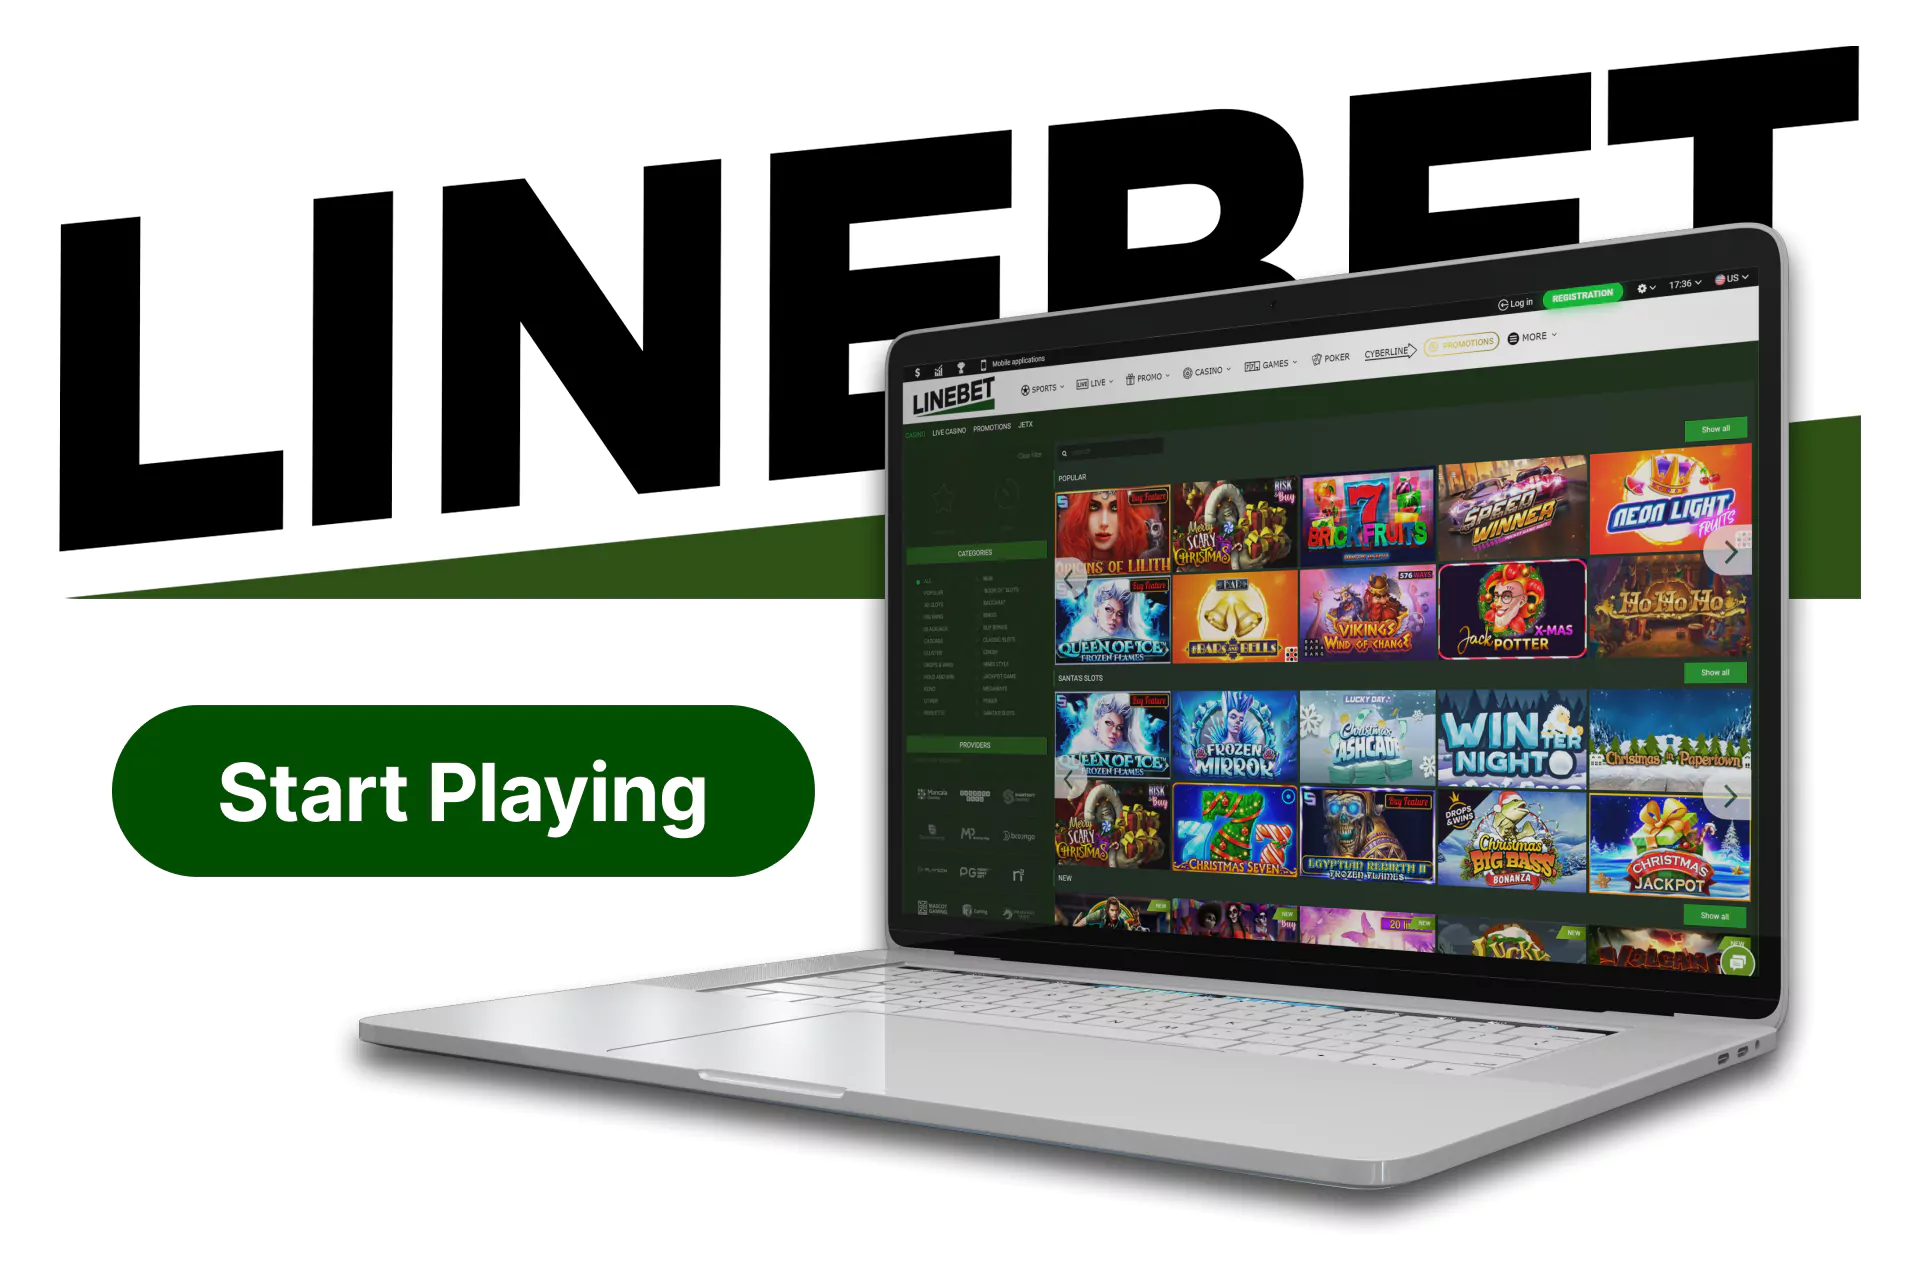 With this instruction, learn how to start playing and betting on slots in Linebet.